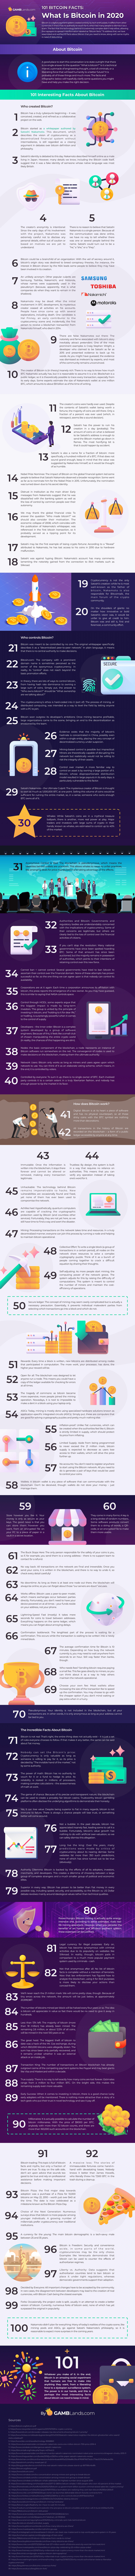 101 Bitcoin Facts: What Is Bitcoin in 2020 #infographic